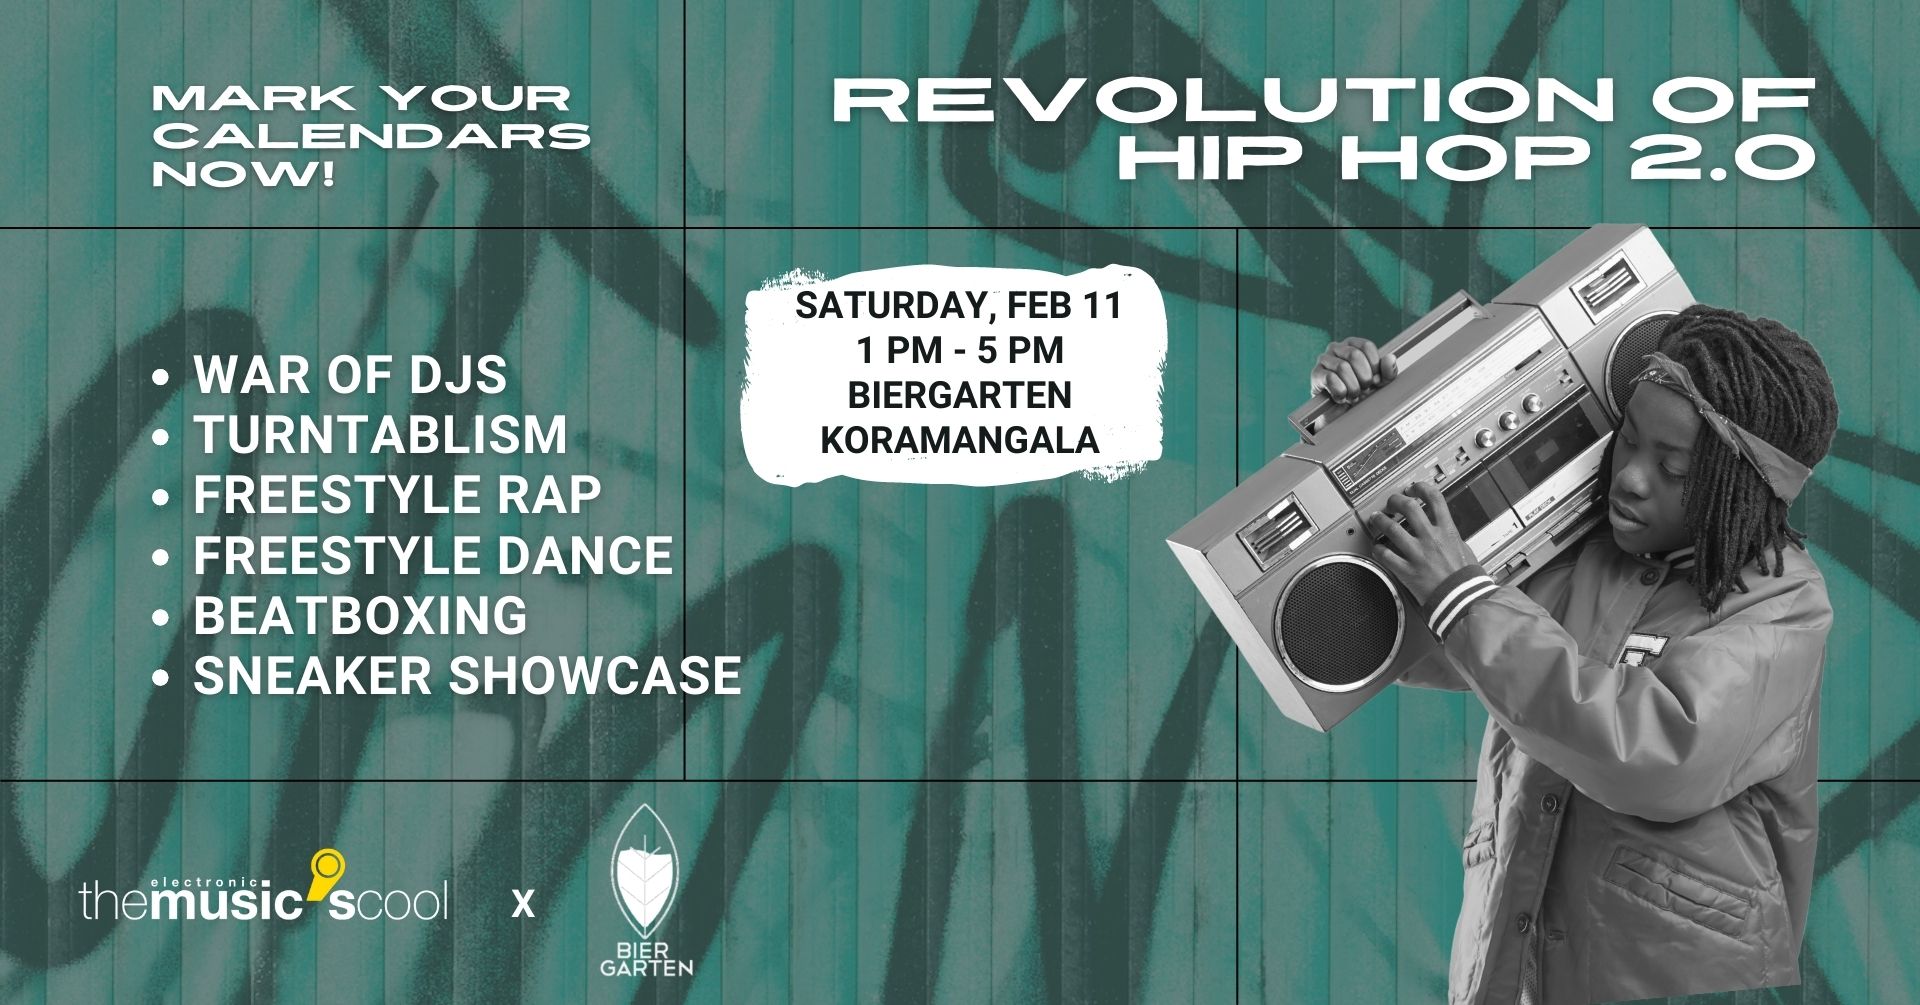 Revolution of Hip Hip 2.0 | The Musiccool Event in Bangalore